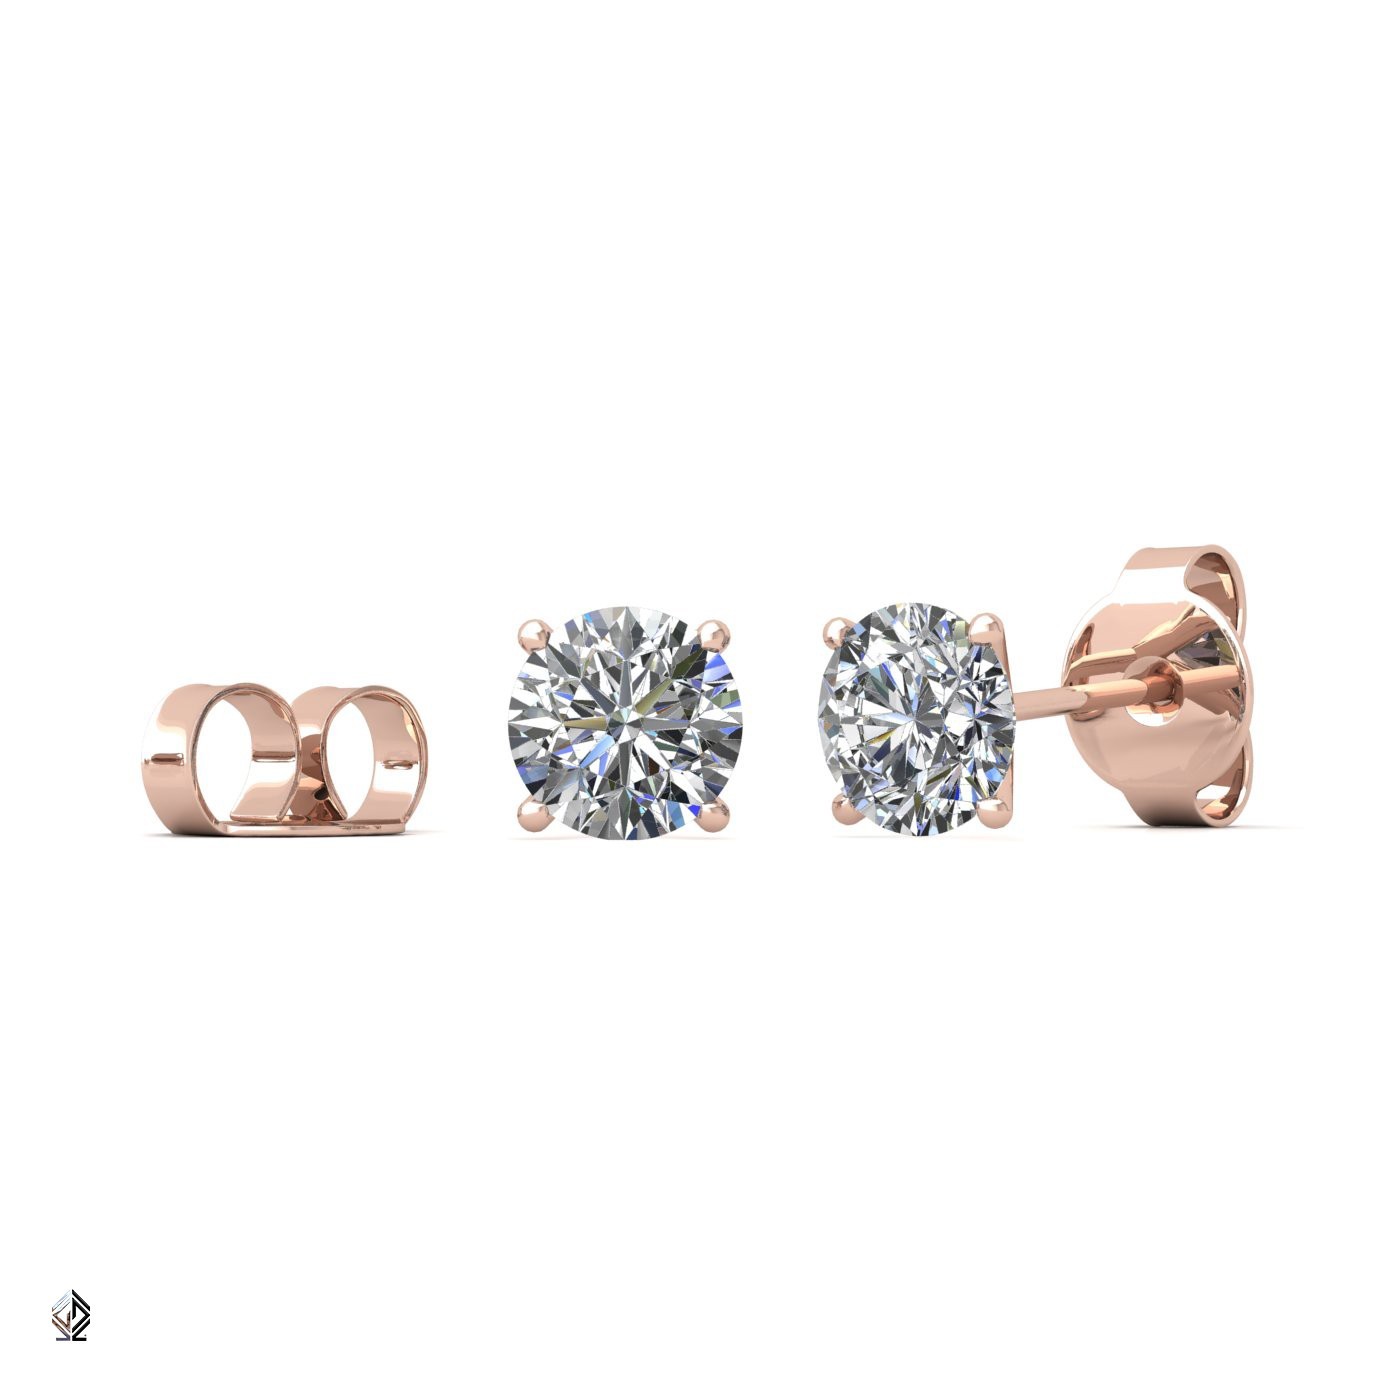 18k rose gold 0,5 ct each (1,0 tcw) 4 prongs round cut classic diamond earring studs Photos & images